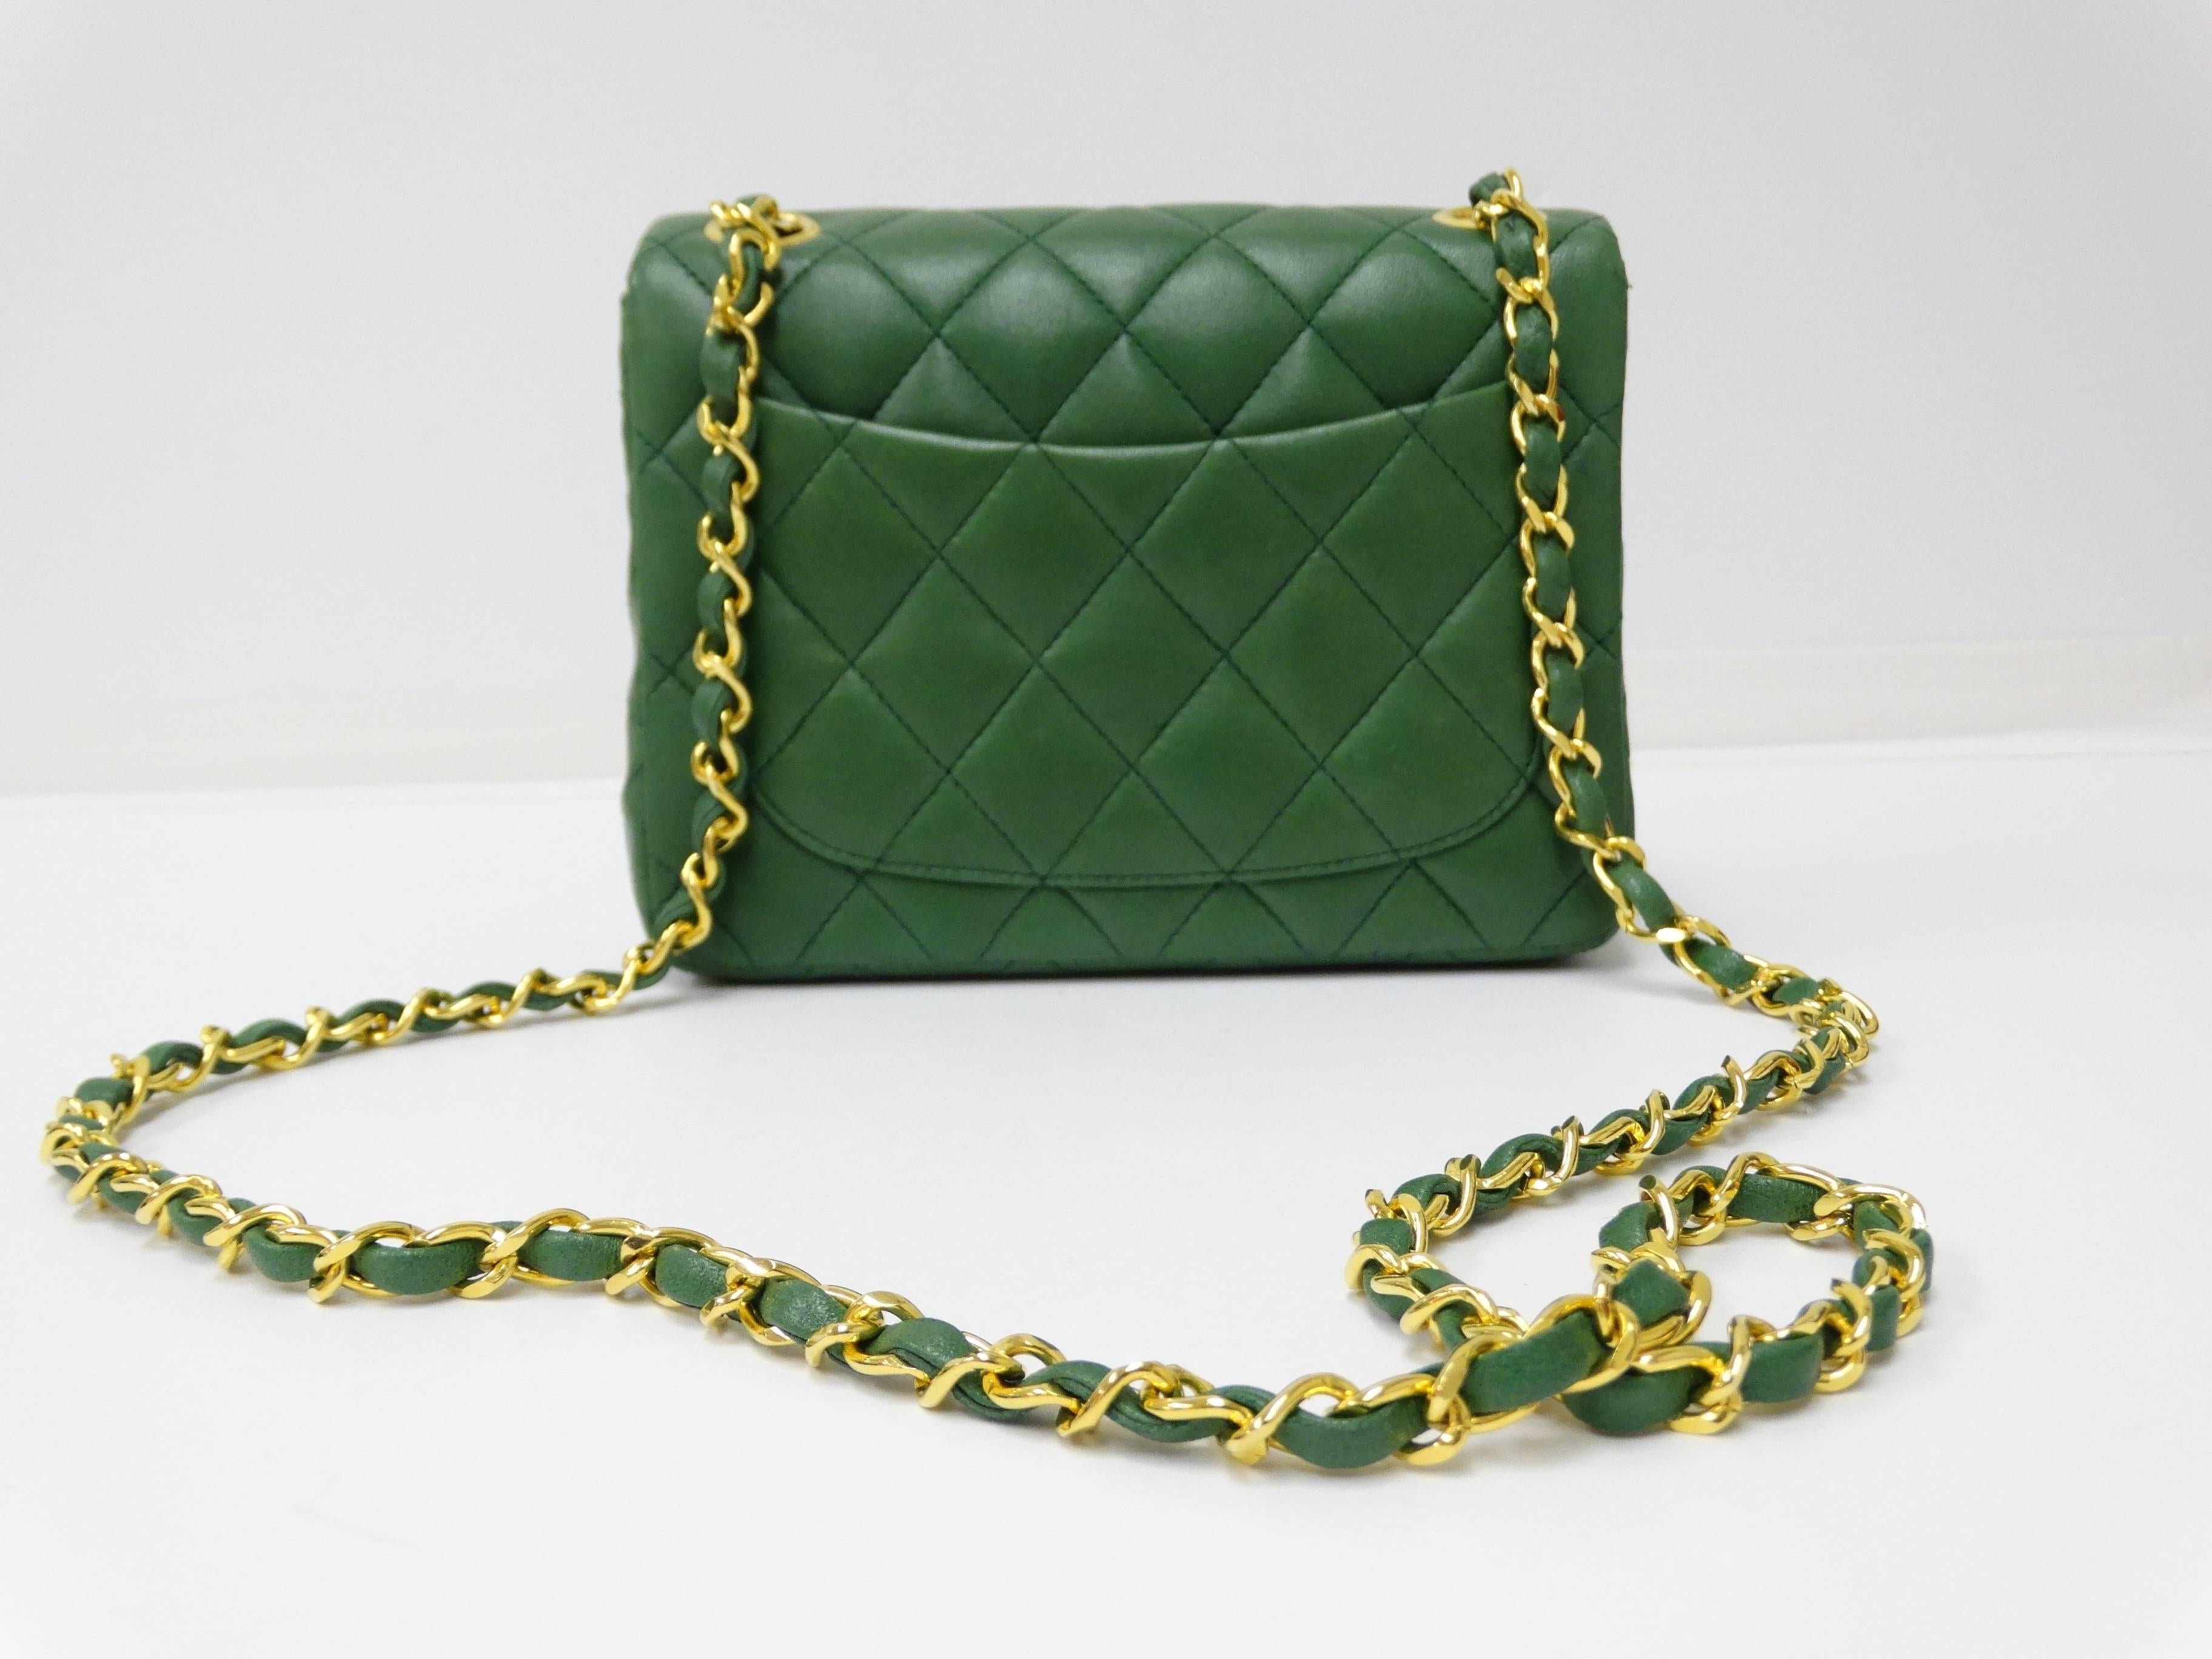 Women's 1990s Chanel Quilted Leather Shoulder Bag 